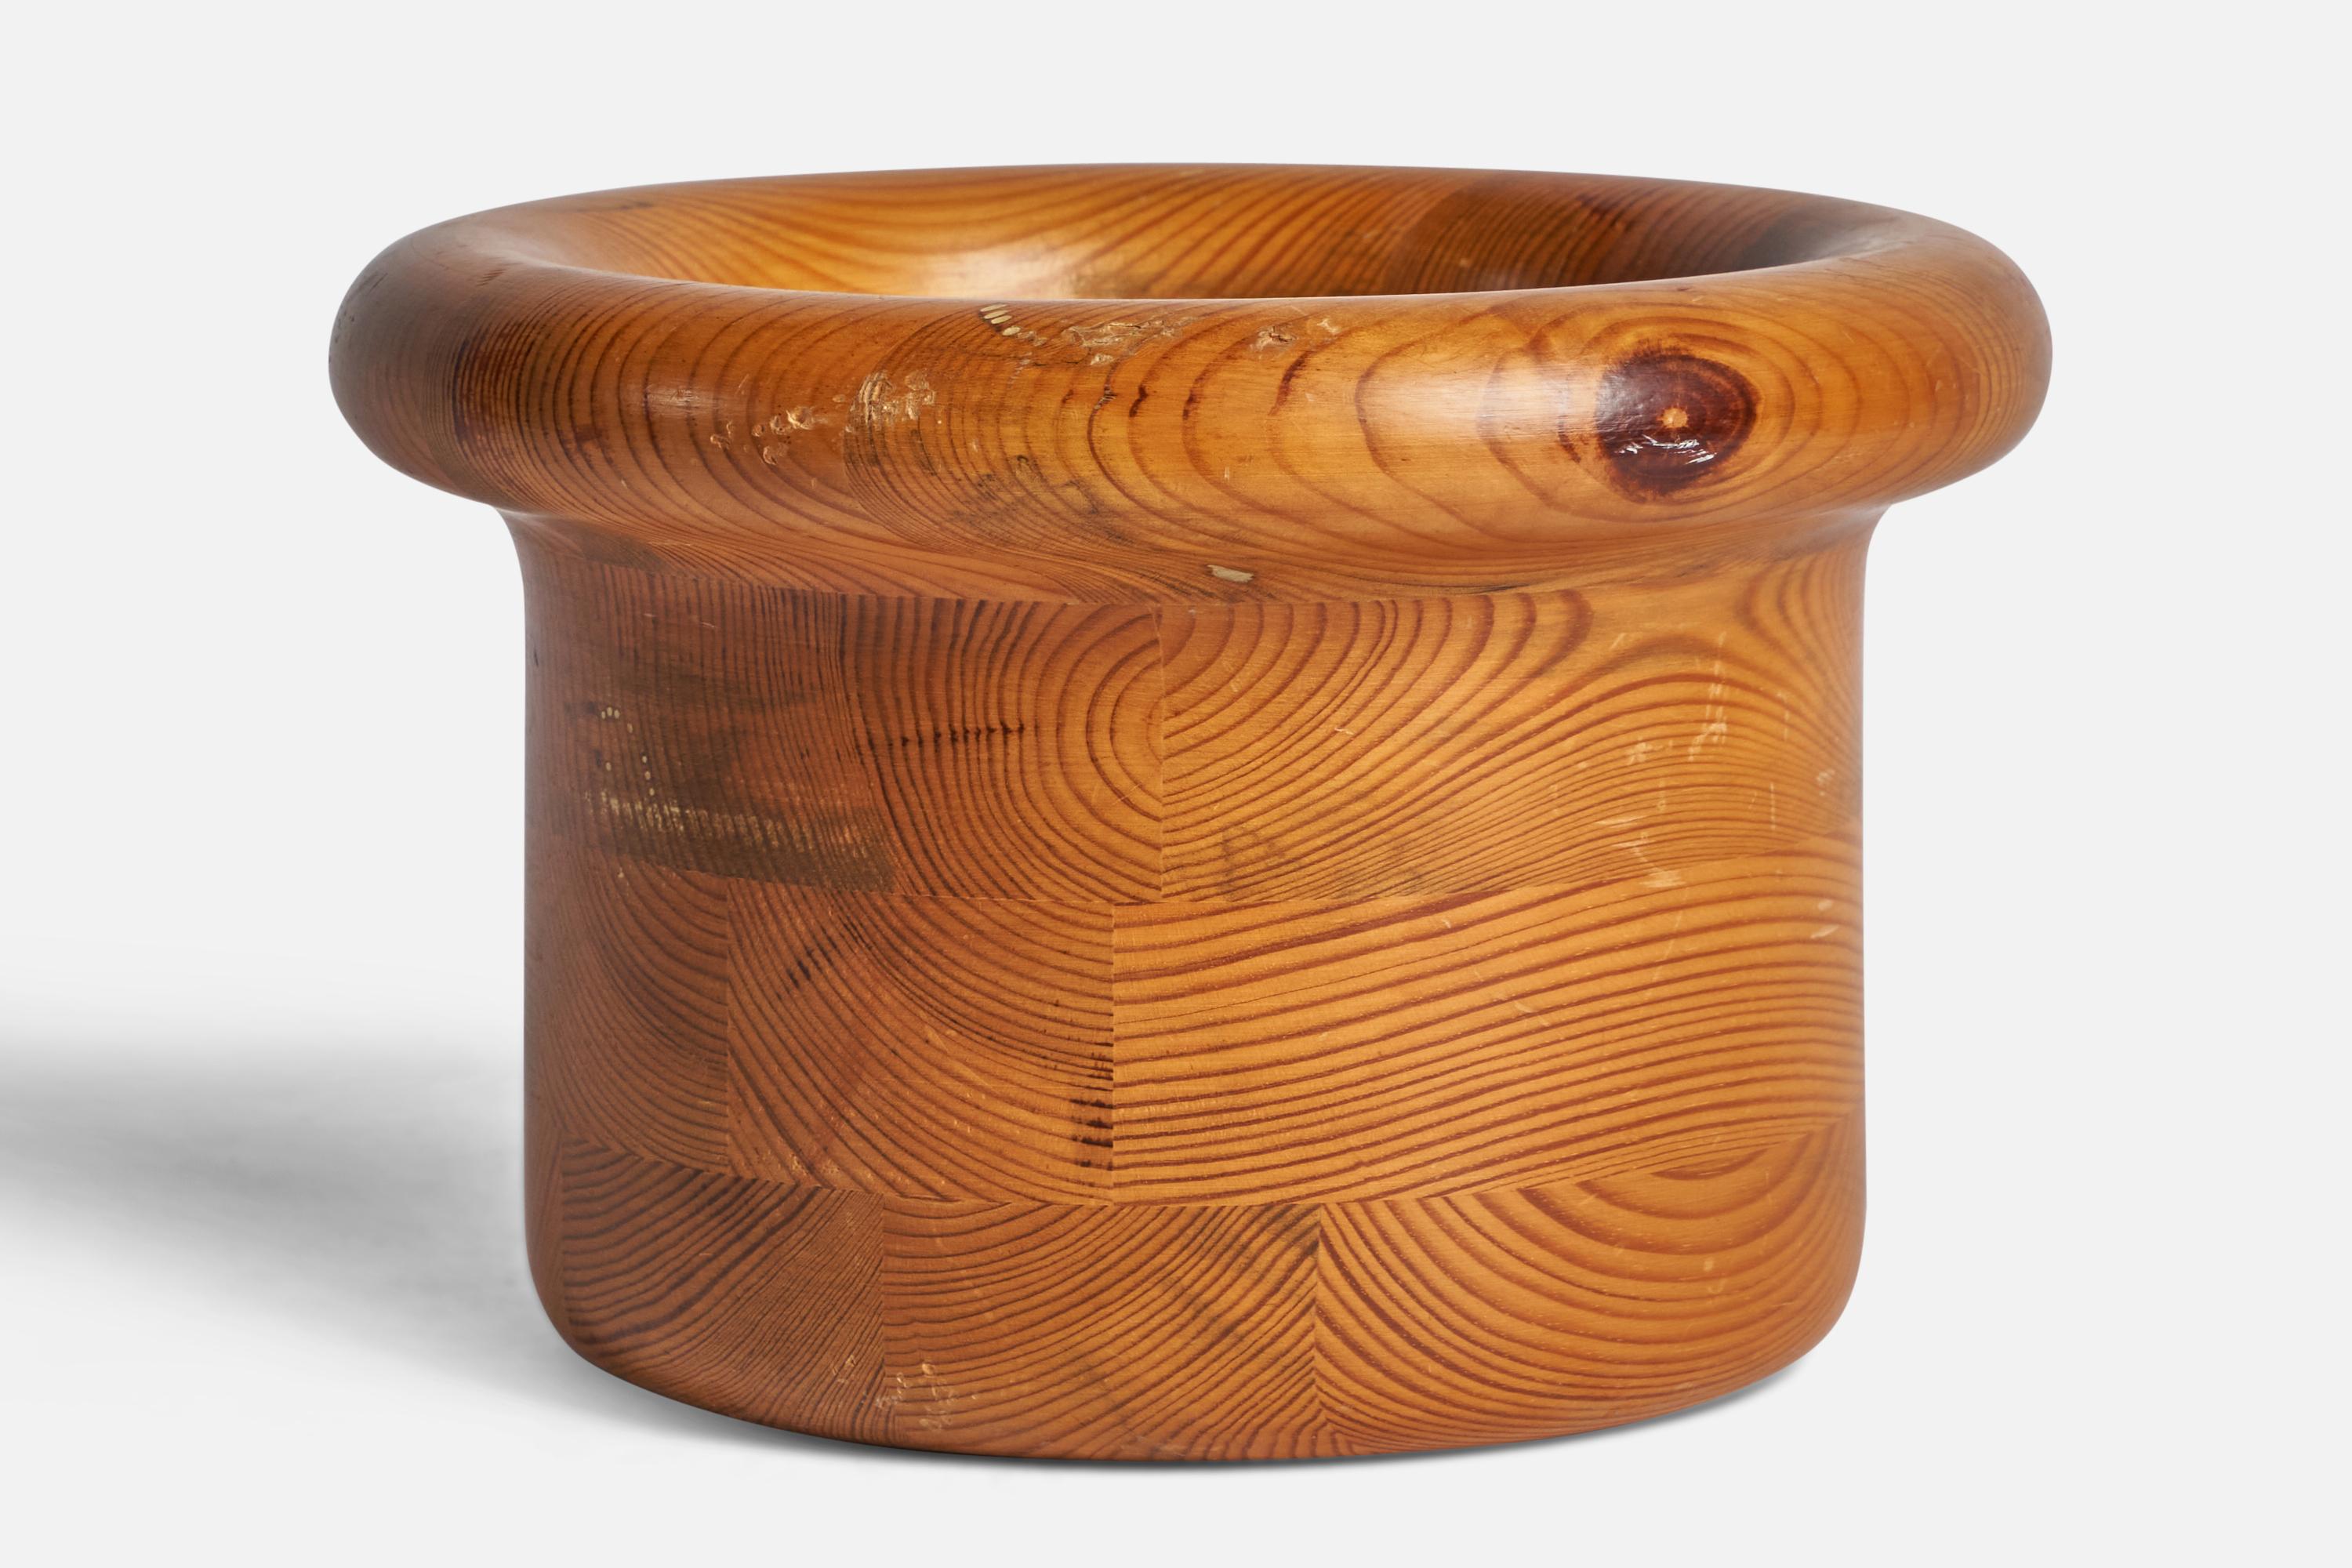 A laminated solid pine bowl designed by Sven and Christer Larsson and produced by Möbel-Shop, Sweden, 1970s.
“Möbel Shop — Form Sven and Christer Larsson” sticker on bottom